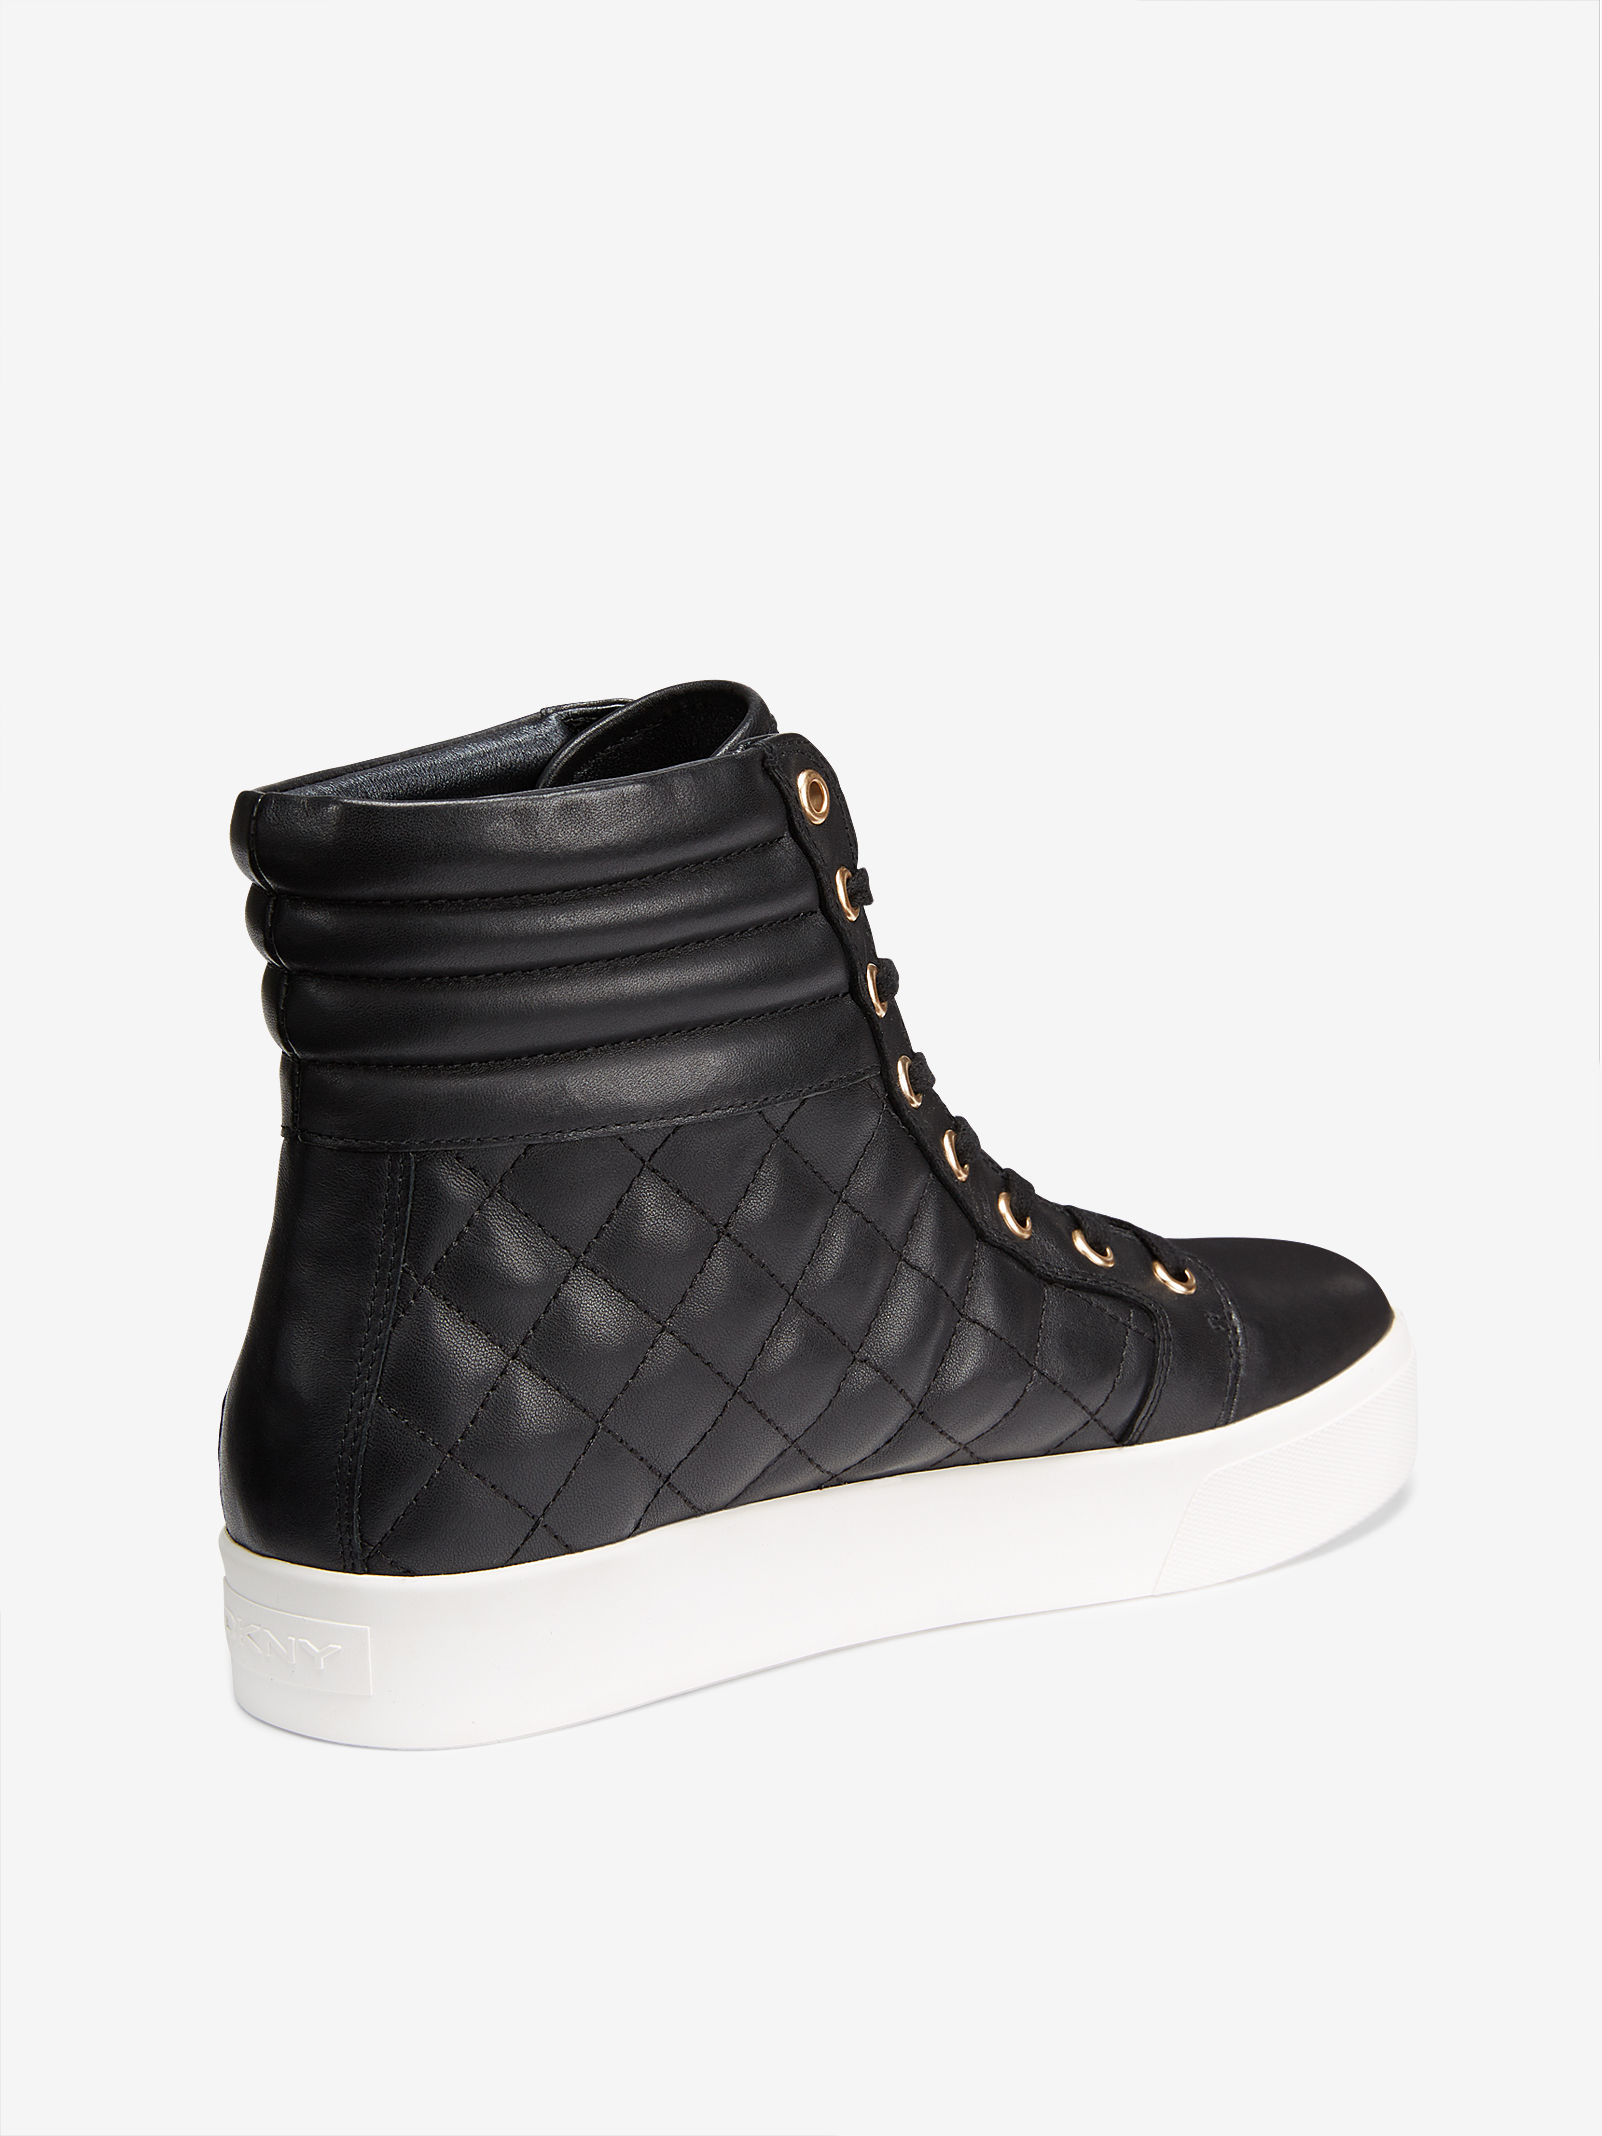 demonstration Pacific tyk DKNY Brea Quilted High Top Sneaker in Black for Men - Lyst